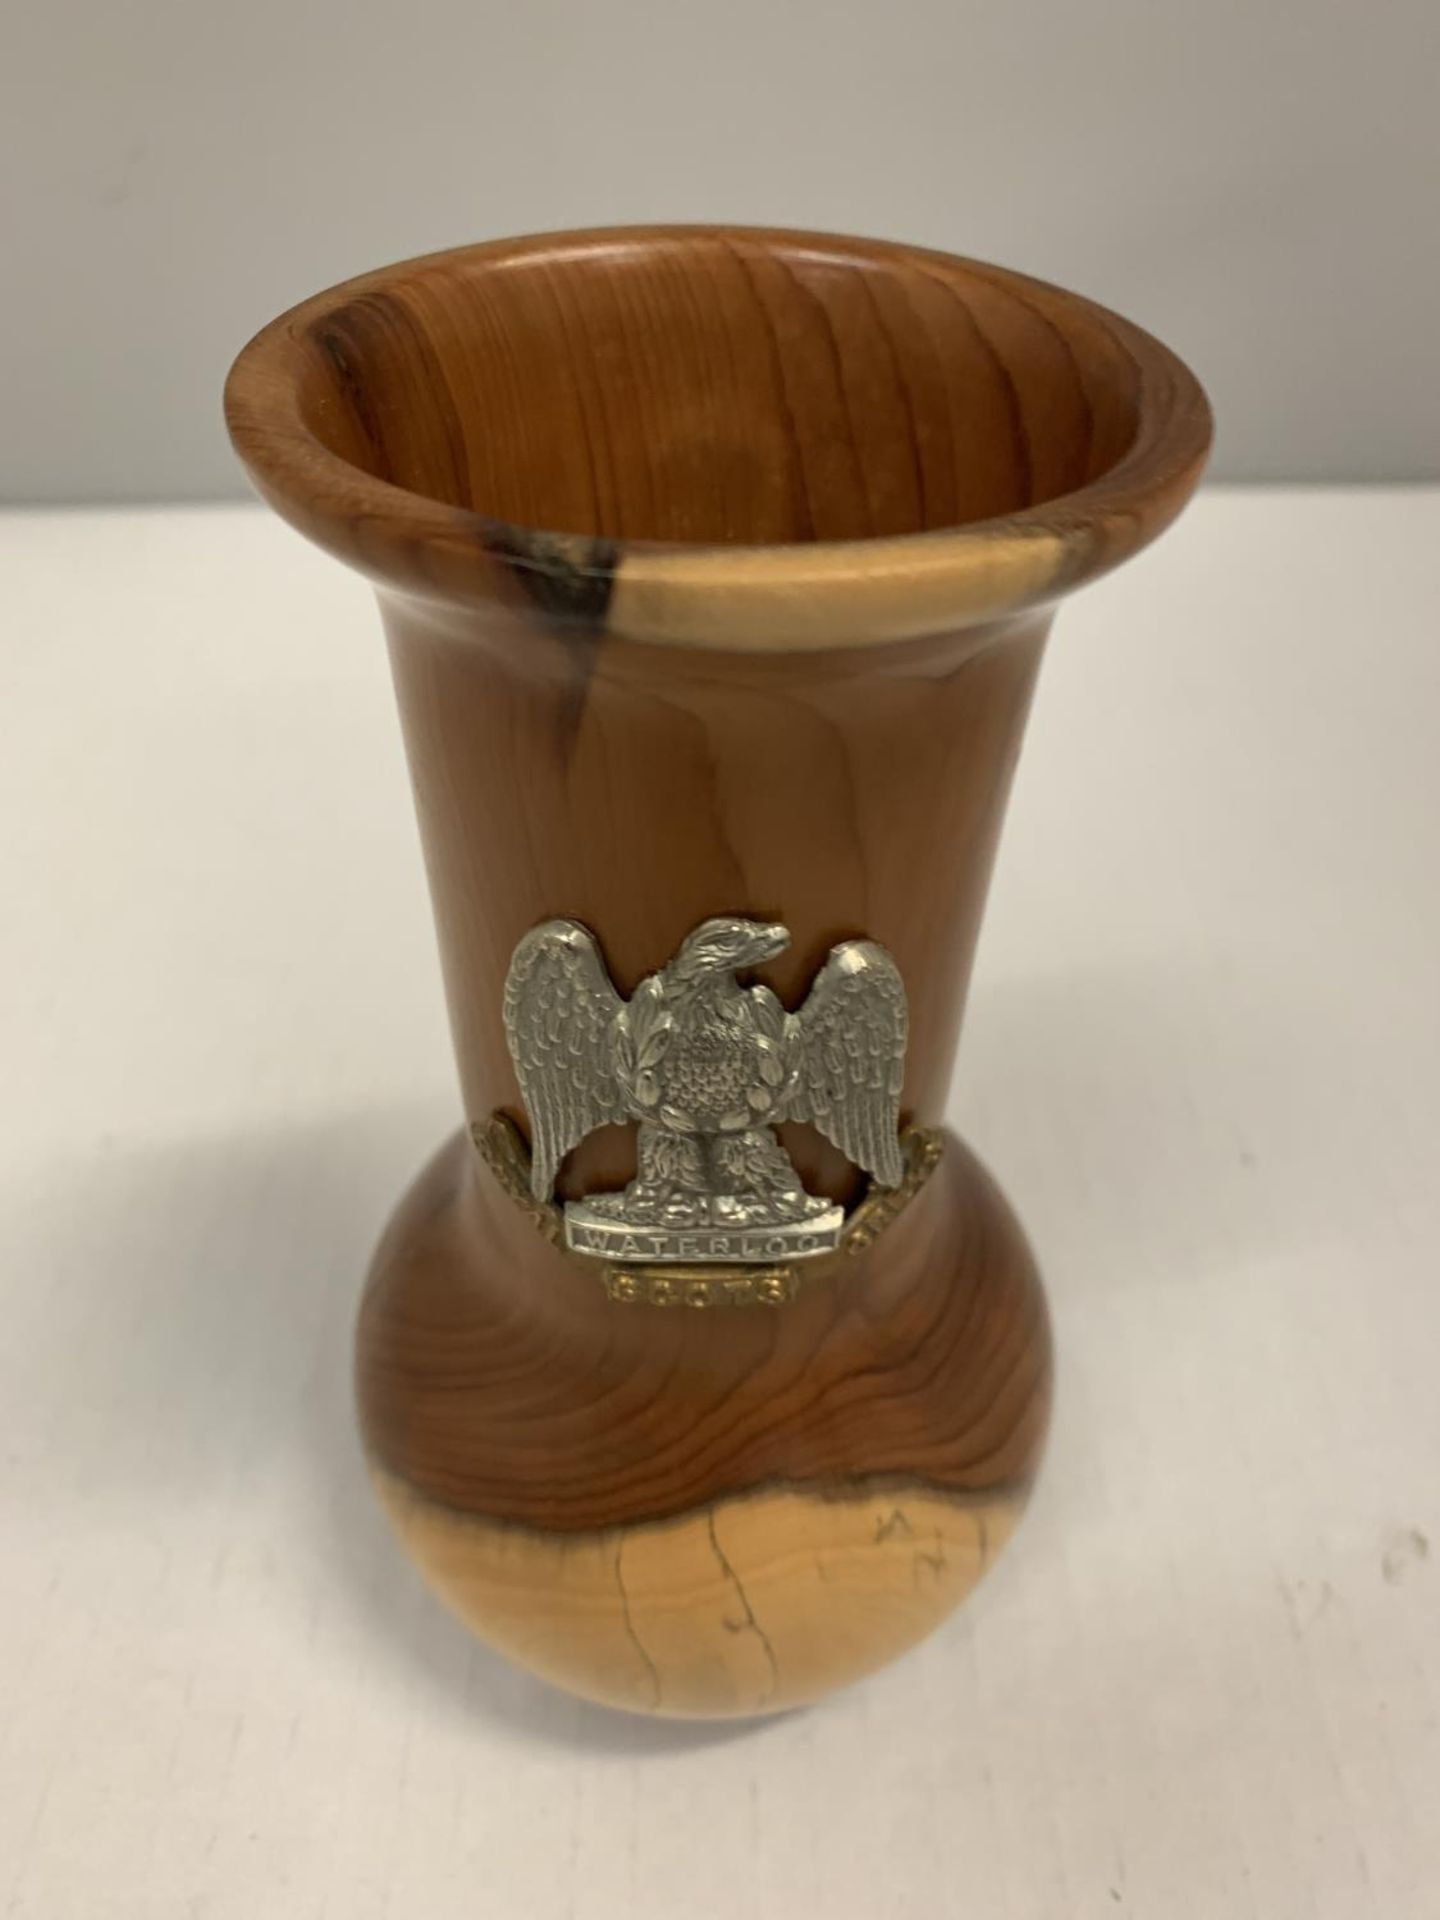 A WOODEN VASE WITH A ROYAL SCOTS GREYS WATERLOO BADGE WITH EAGLE EMBLEM